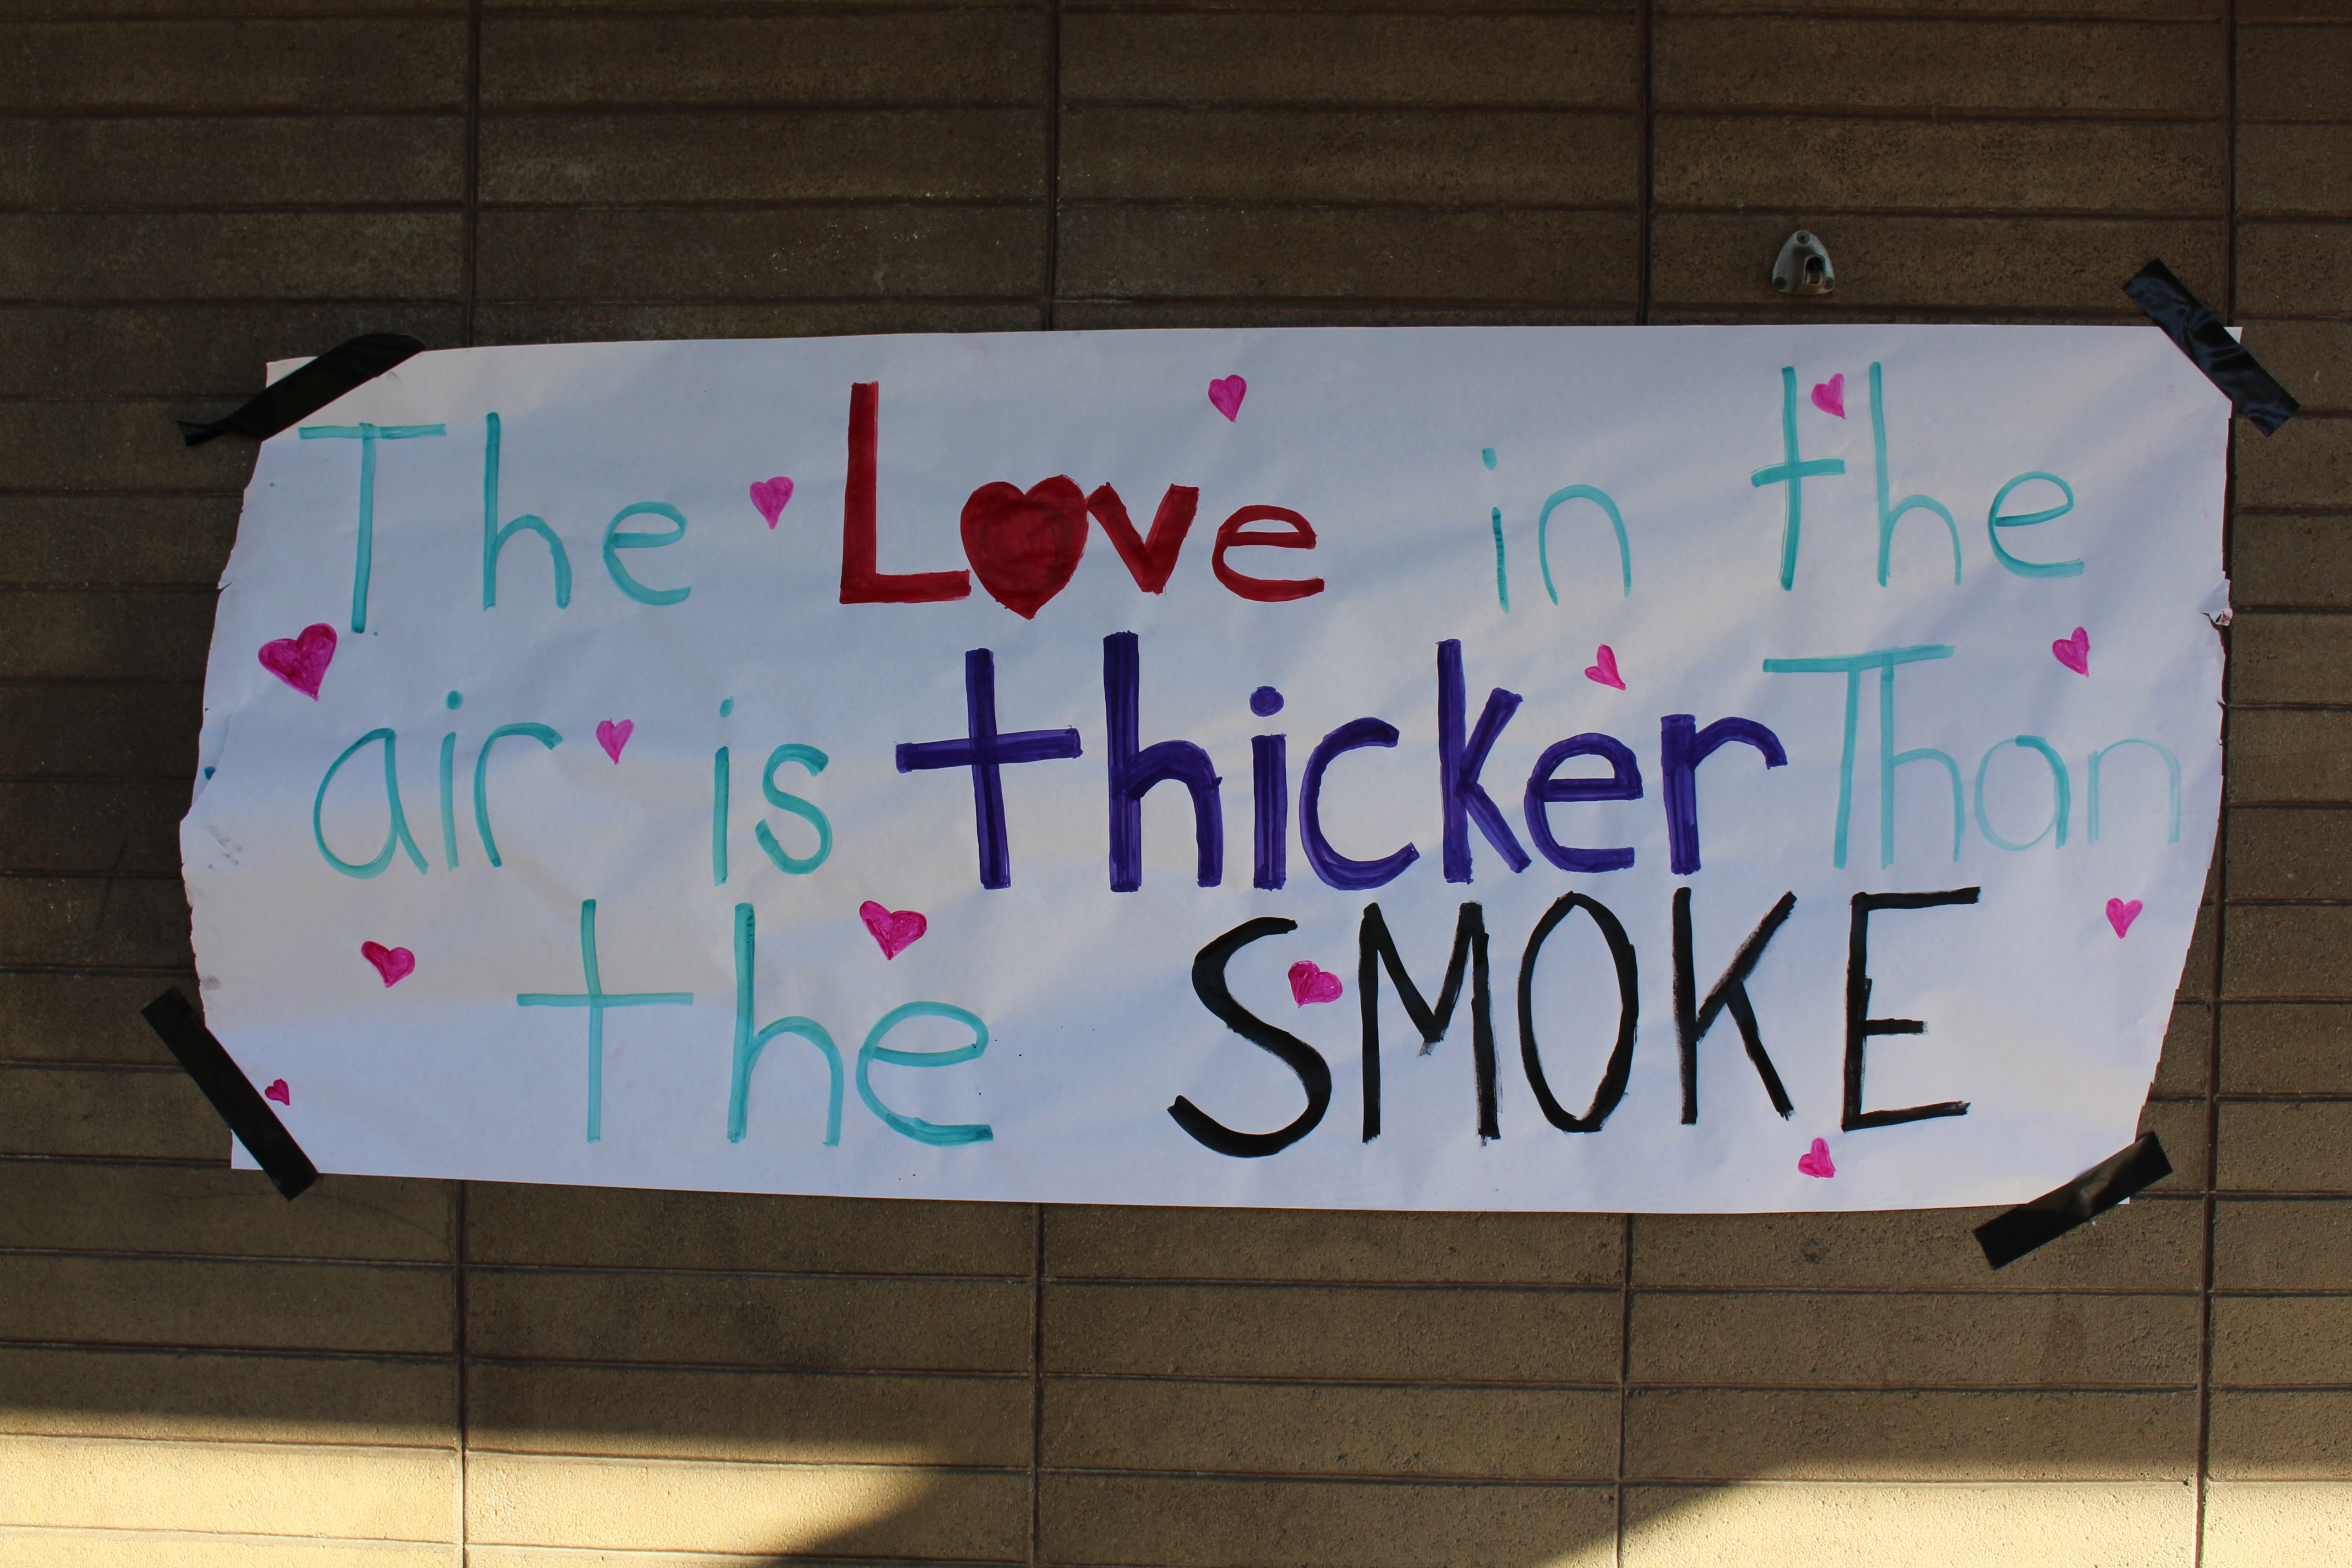 School sign of the times: “The love in the air is thicker than the smoke.”